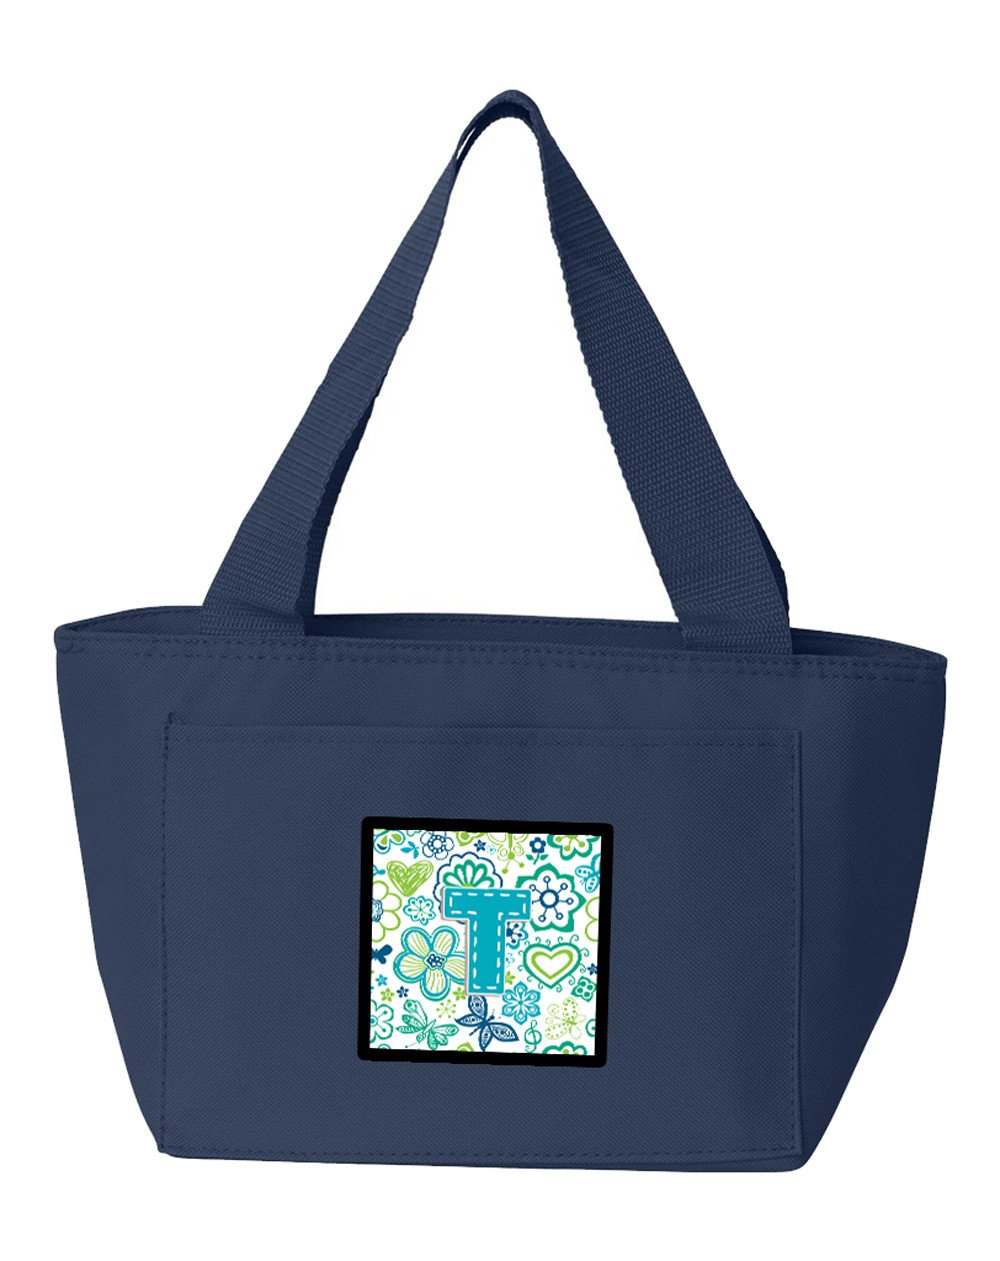 Letter T Flowers and Butterflies Teal Blue Lunch Bag CJ2006-TNA-8808 by Caroline's Treasures